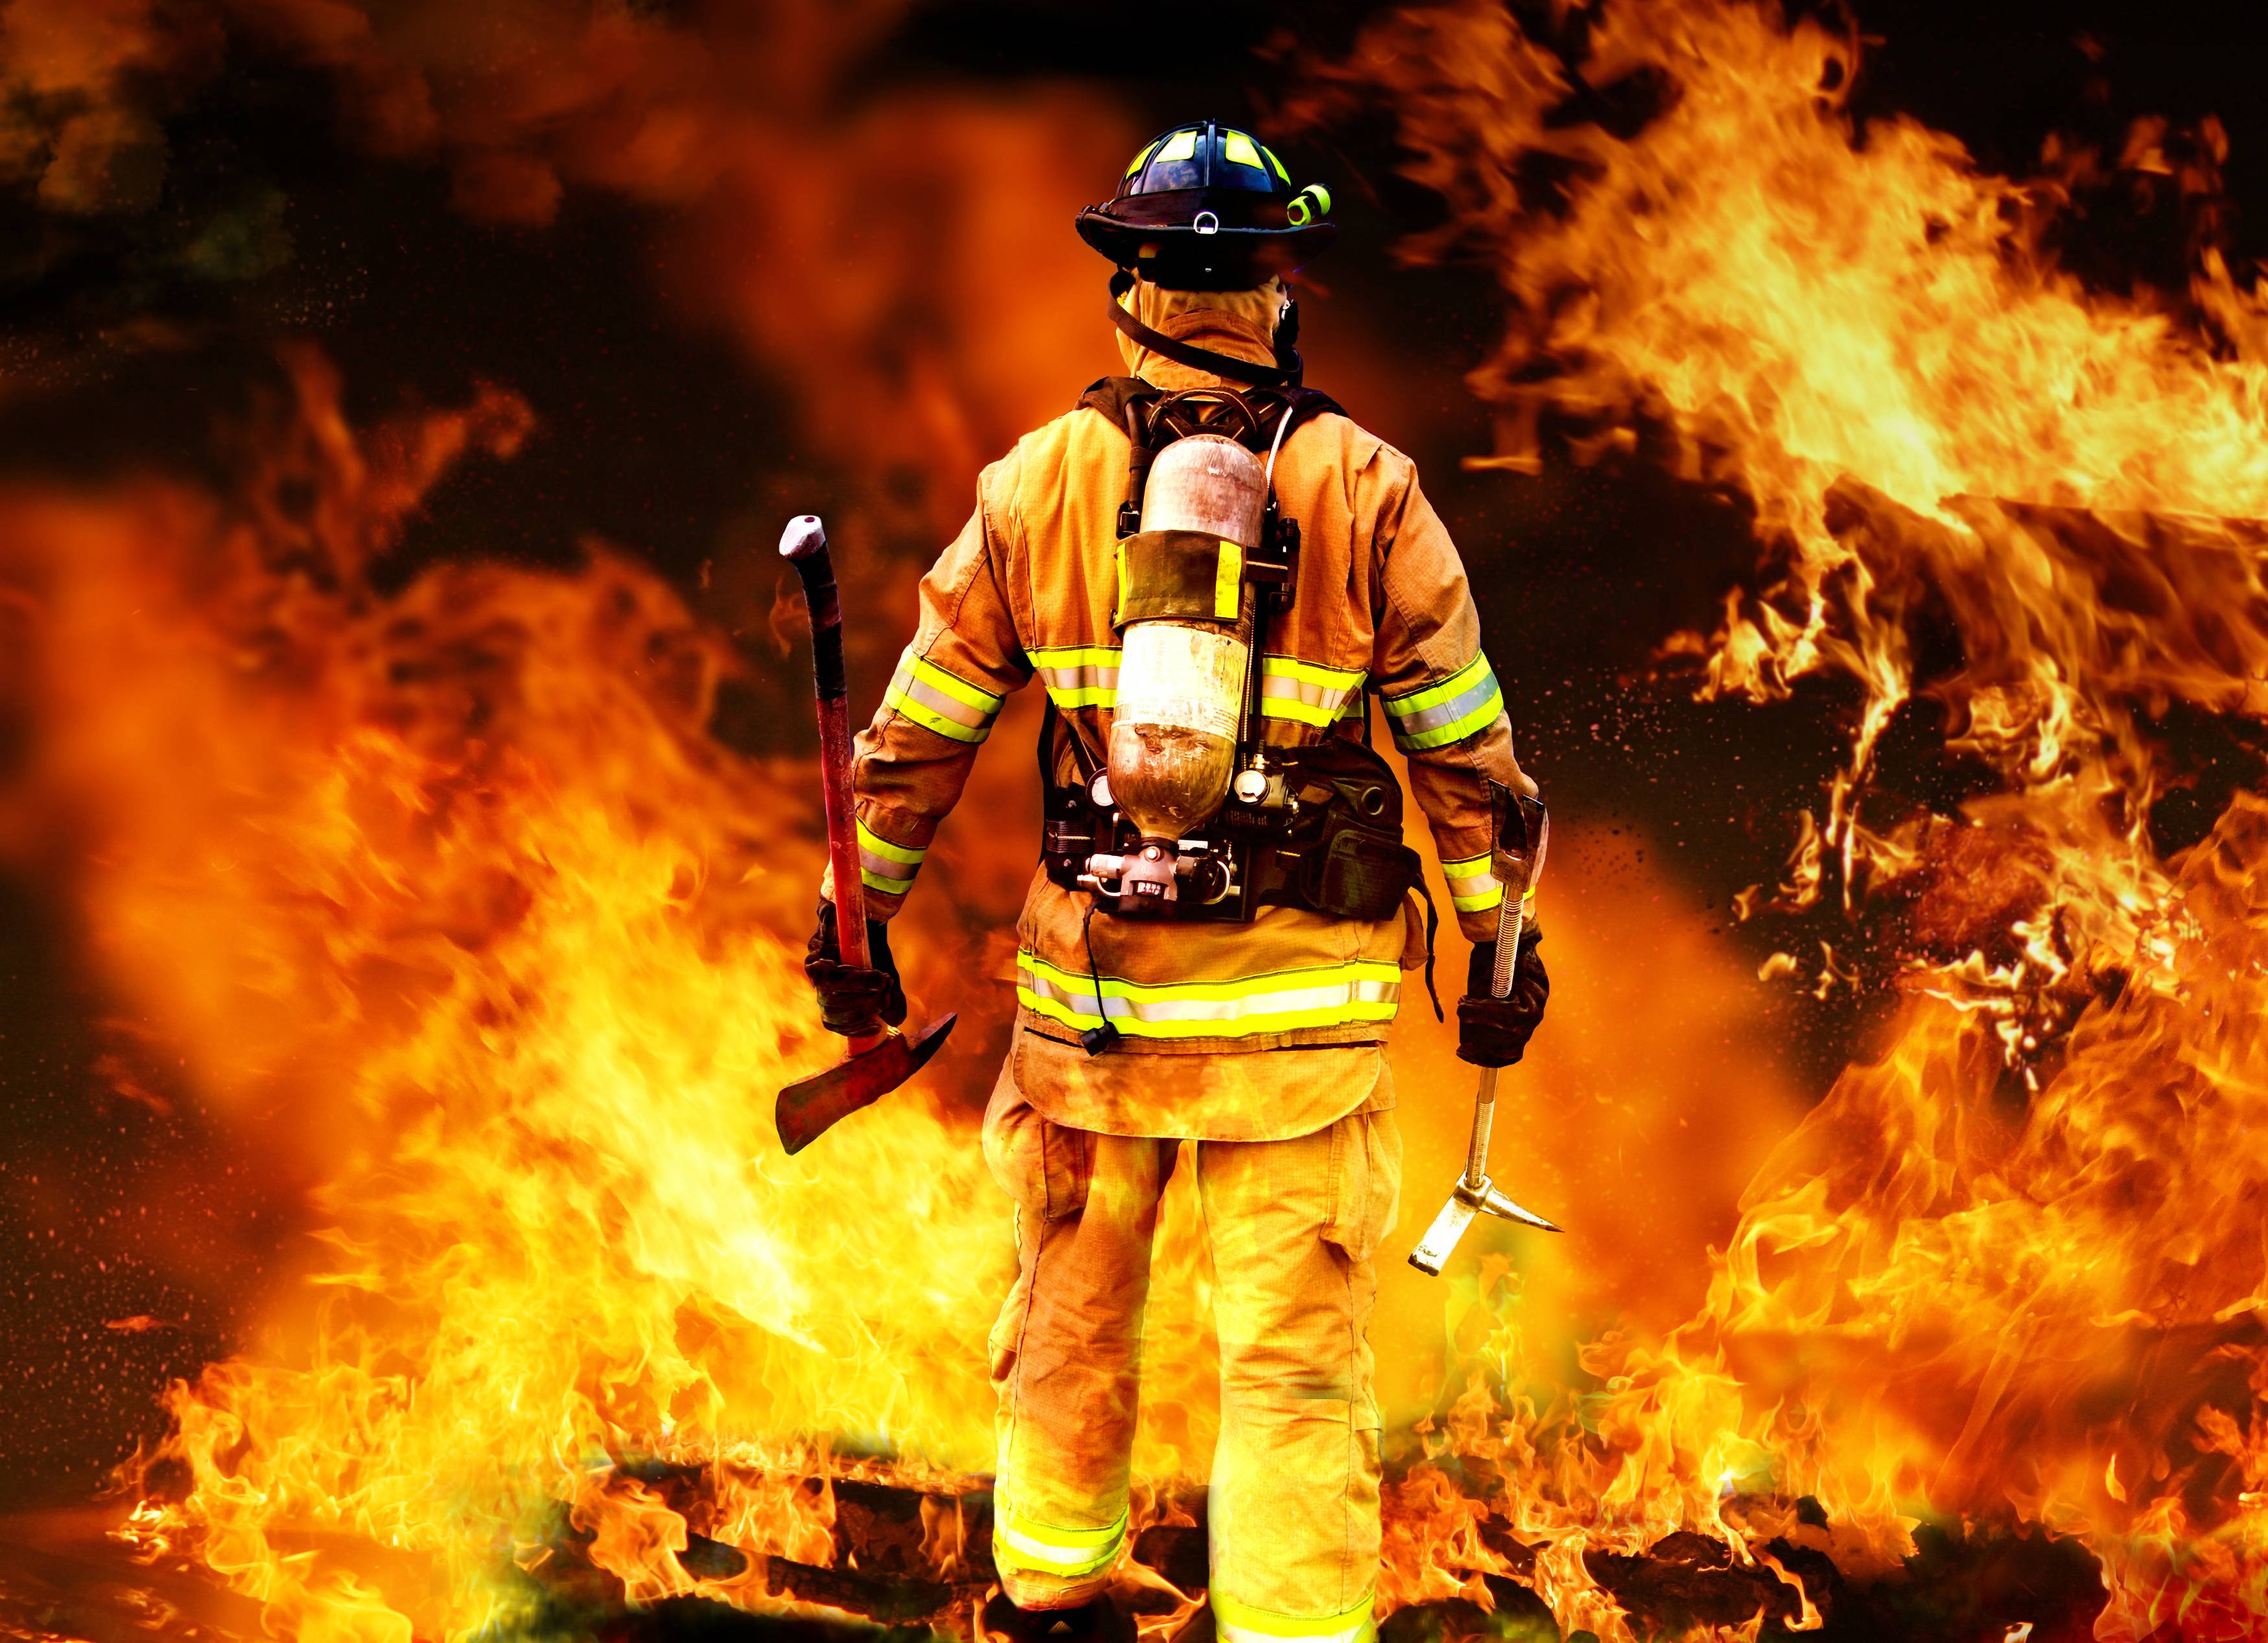 Firefighter Wallpapers For Computer - Wallpaper Cave